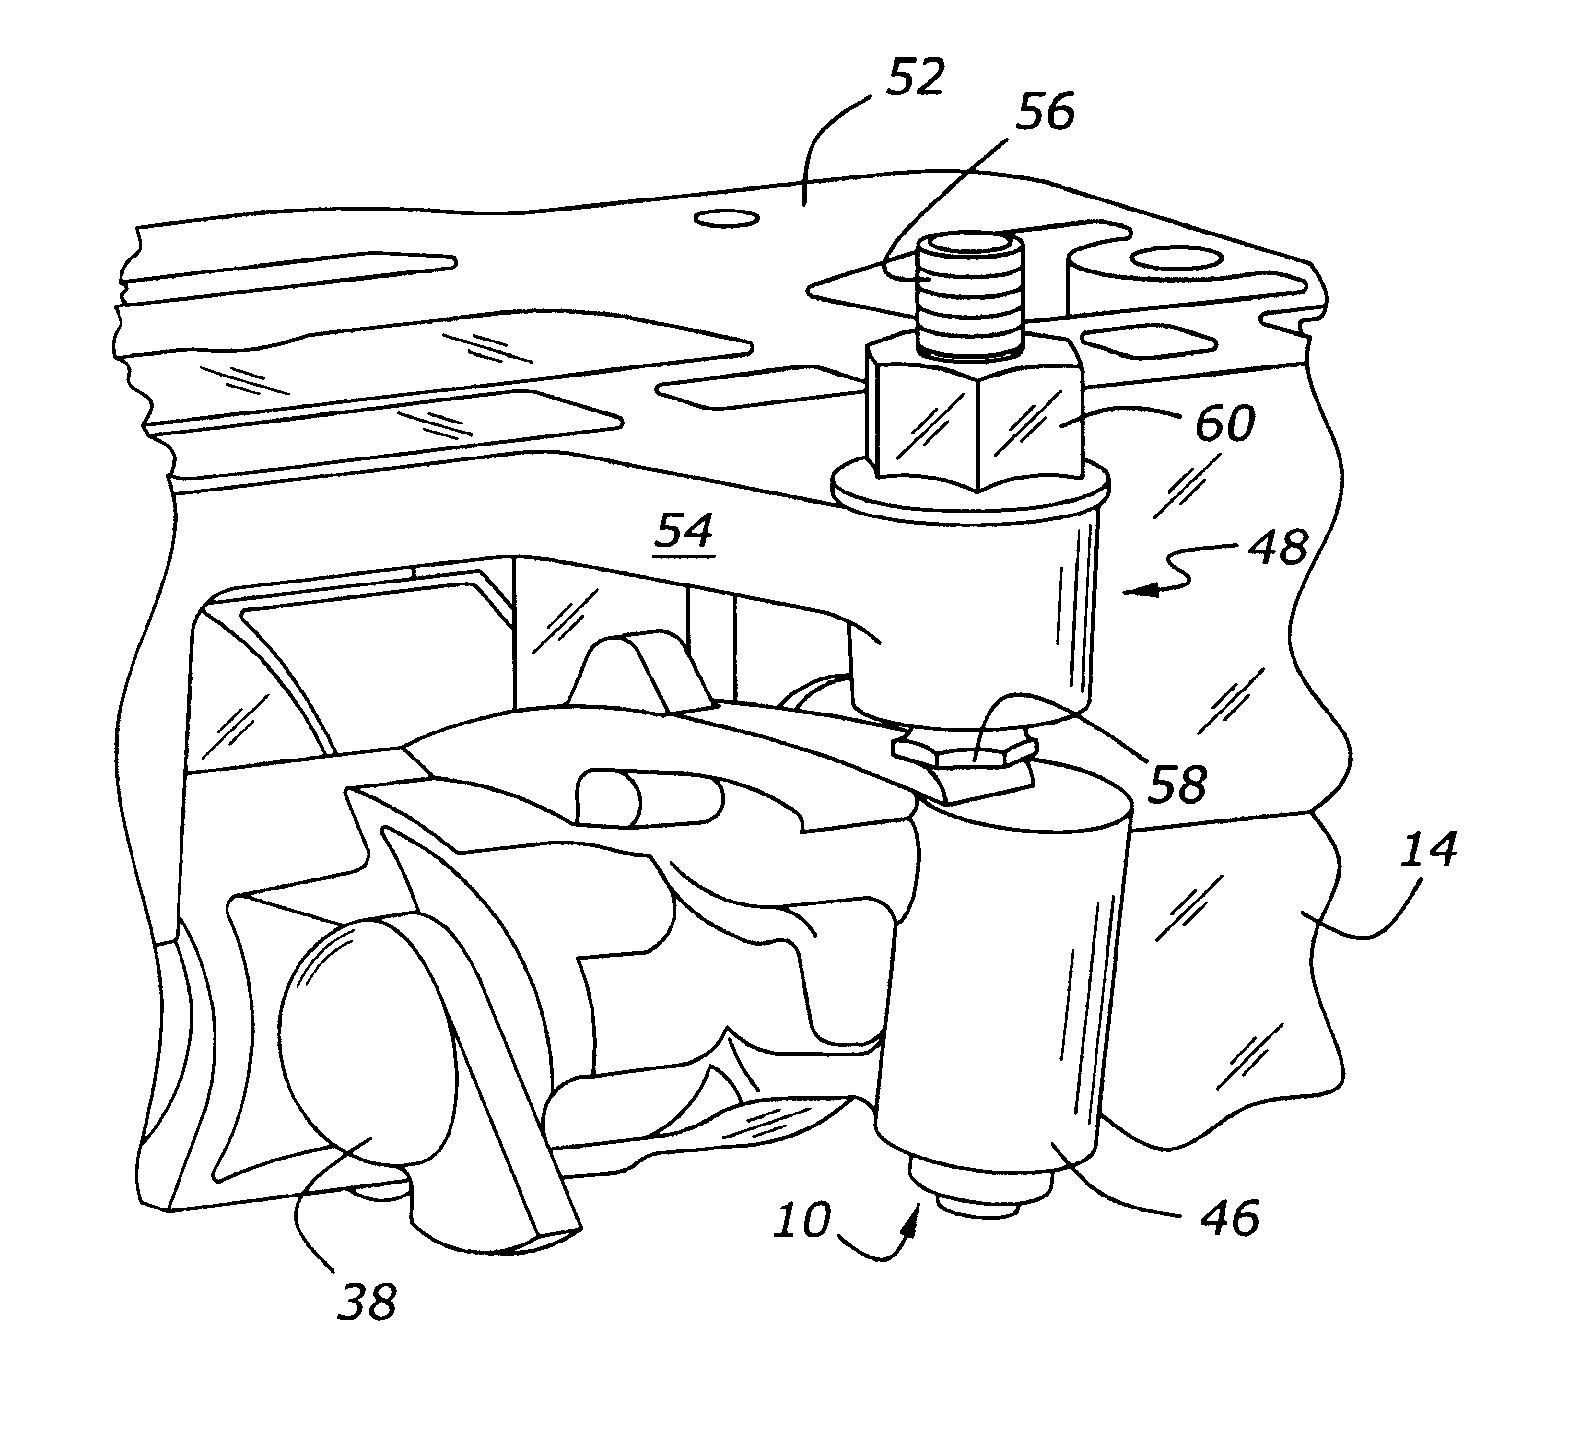 Valve operating system for variable displacement internal combustion engine